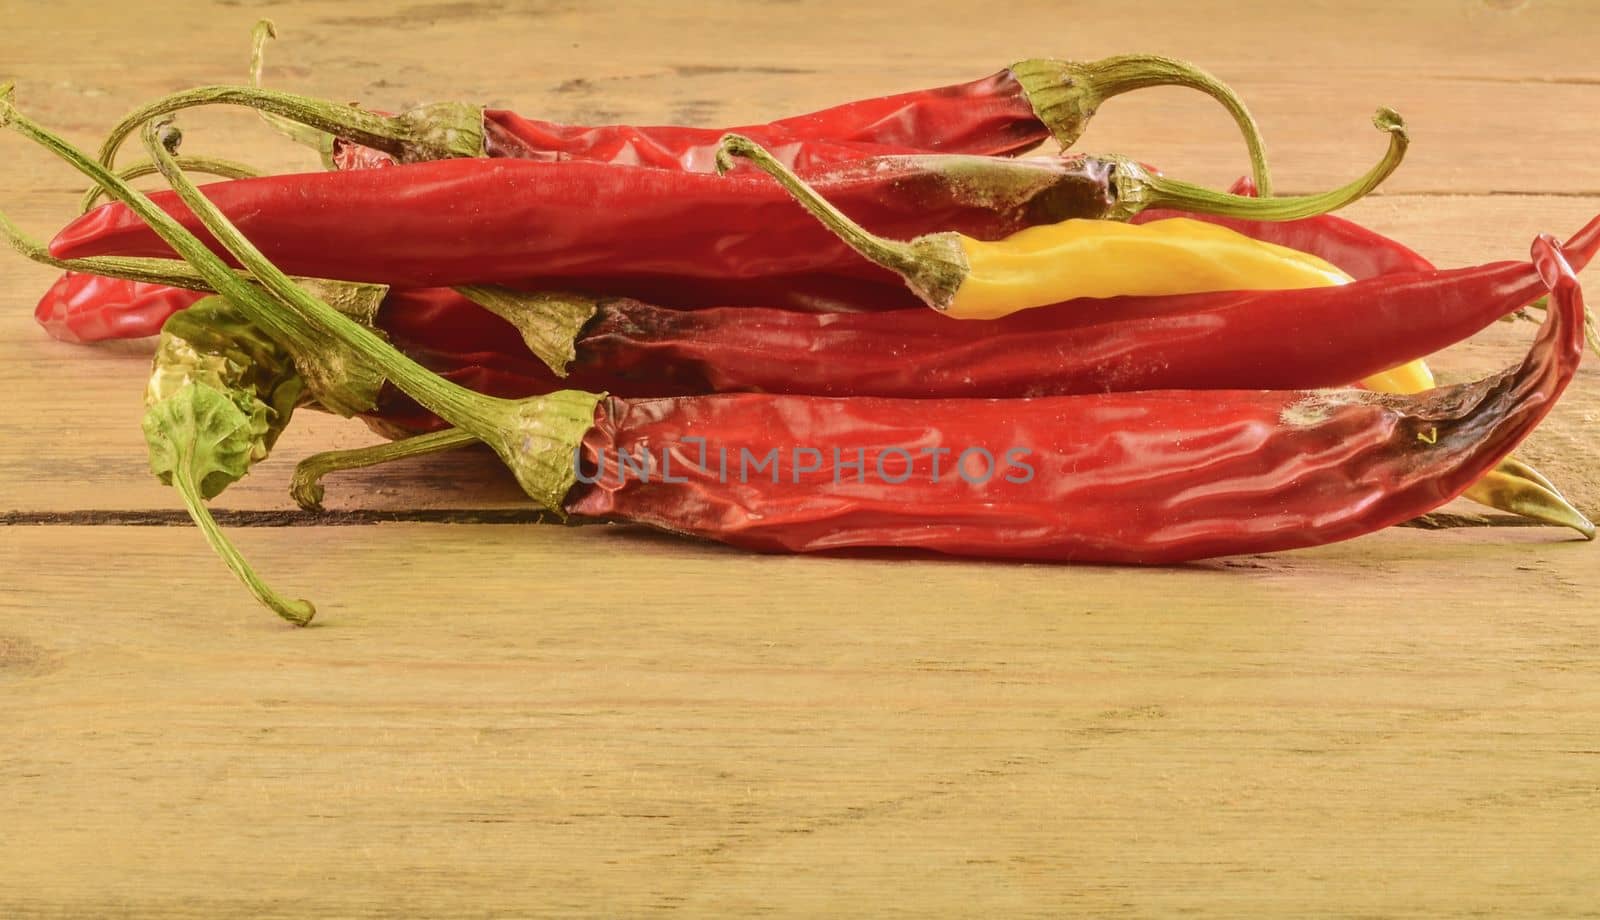 Shrinking and mould chili peppers on white wooden background. Rotten chili peppers.